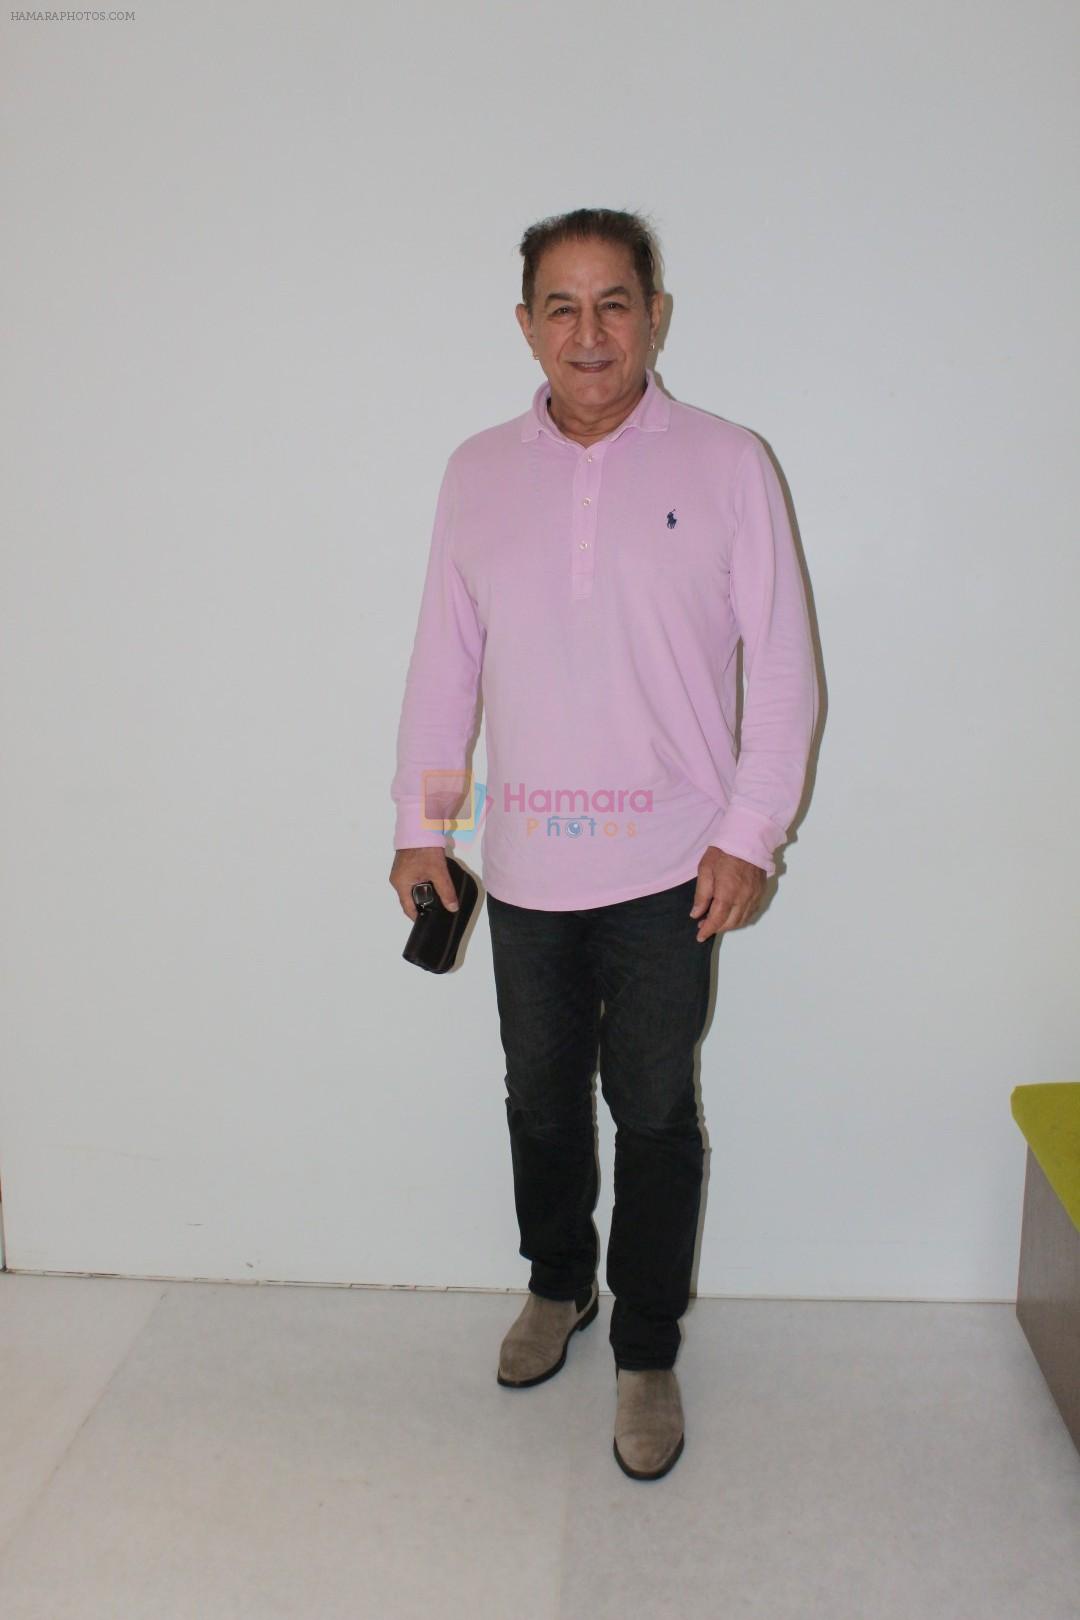 Dalip Tahil At Godrej India Culture Lab Museum of Memories Remembering Partition on 5th Aug 2017